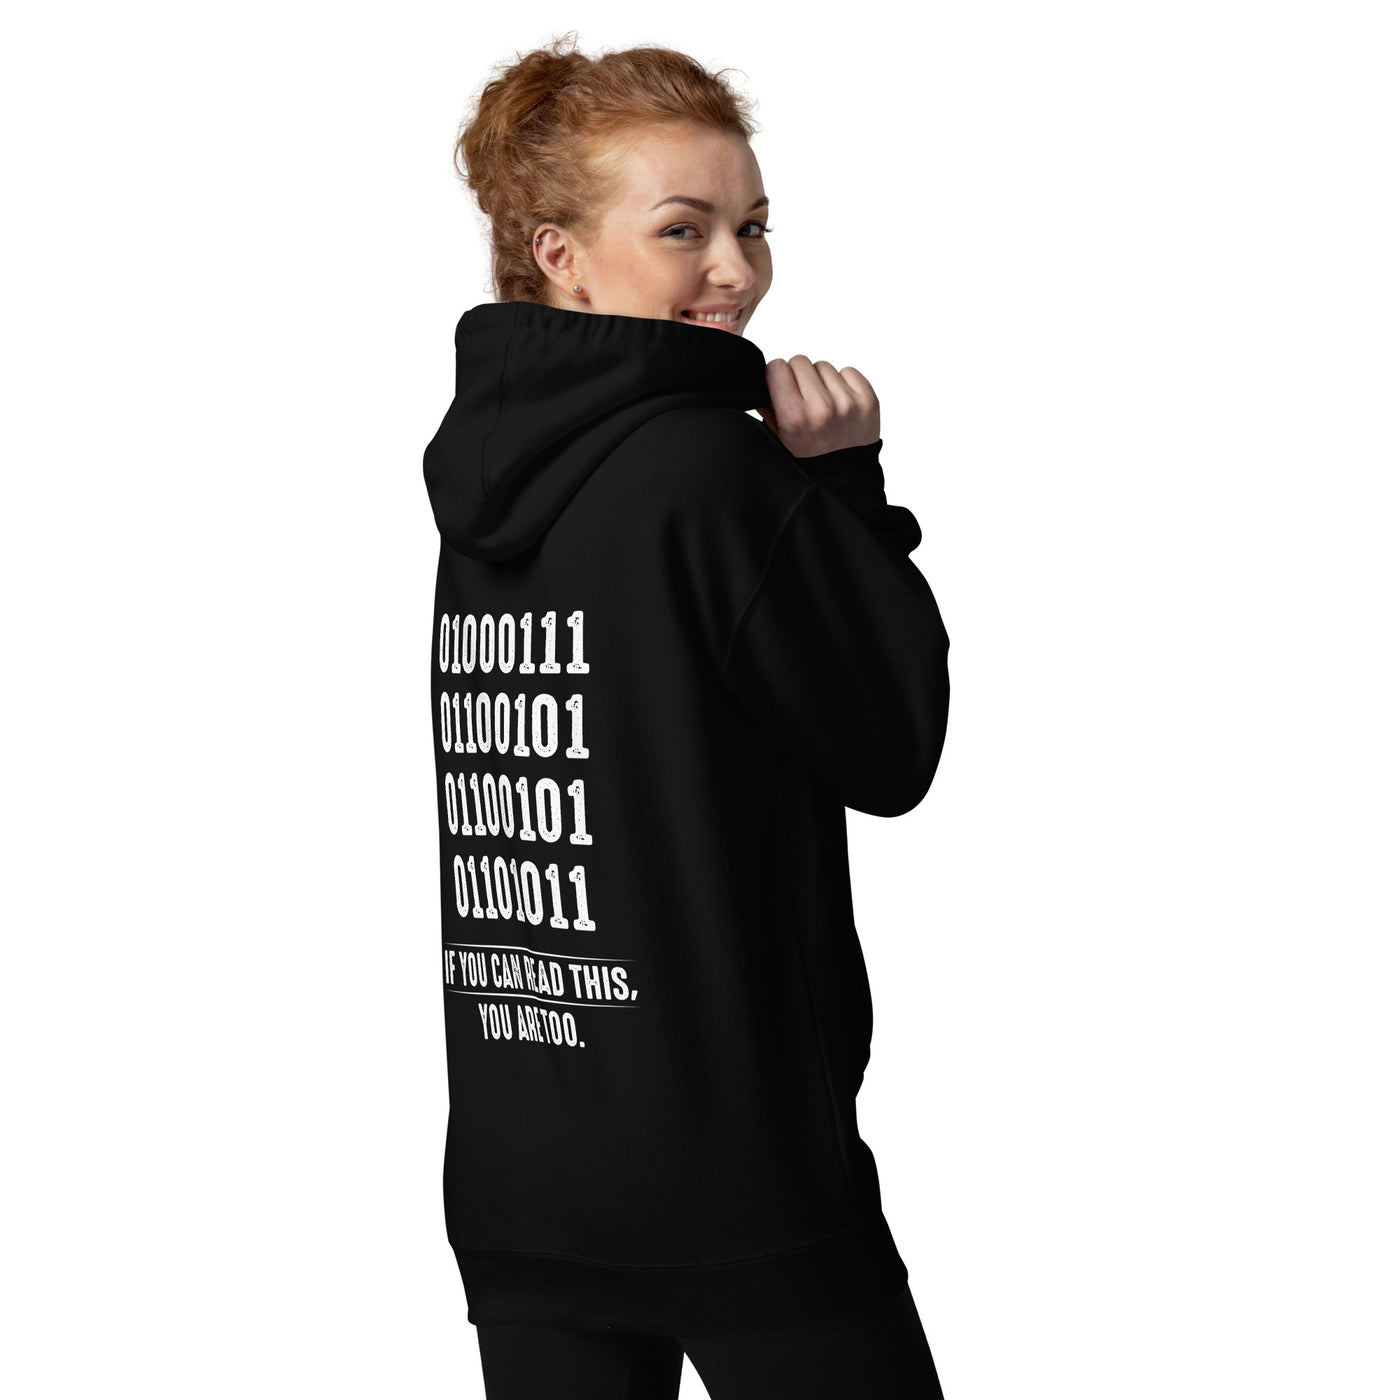 If you can read this, you are too - Unisex Hoodie ( Back Print )